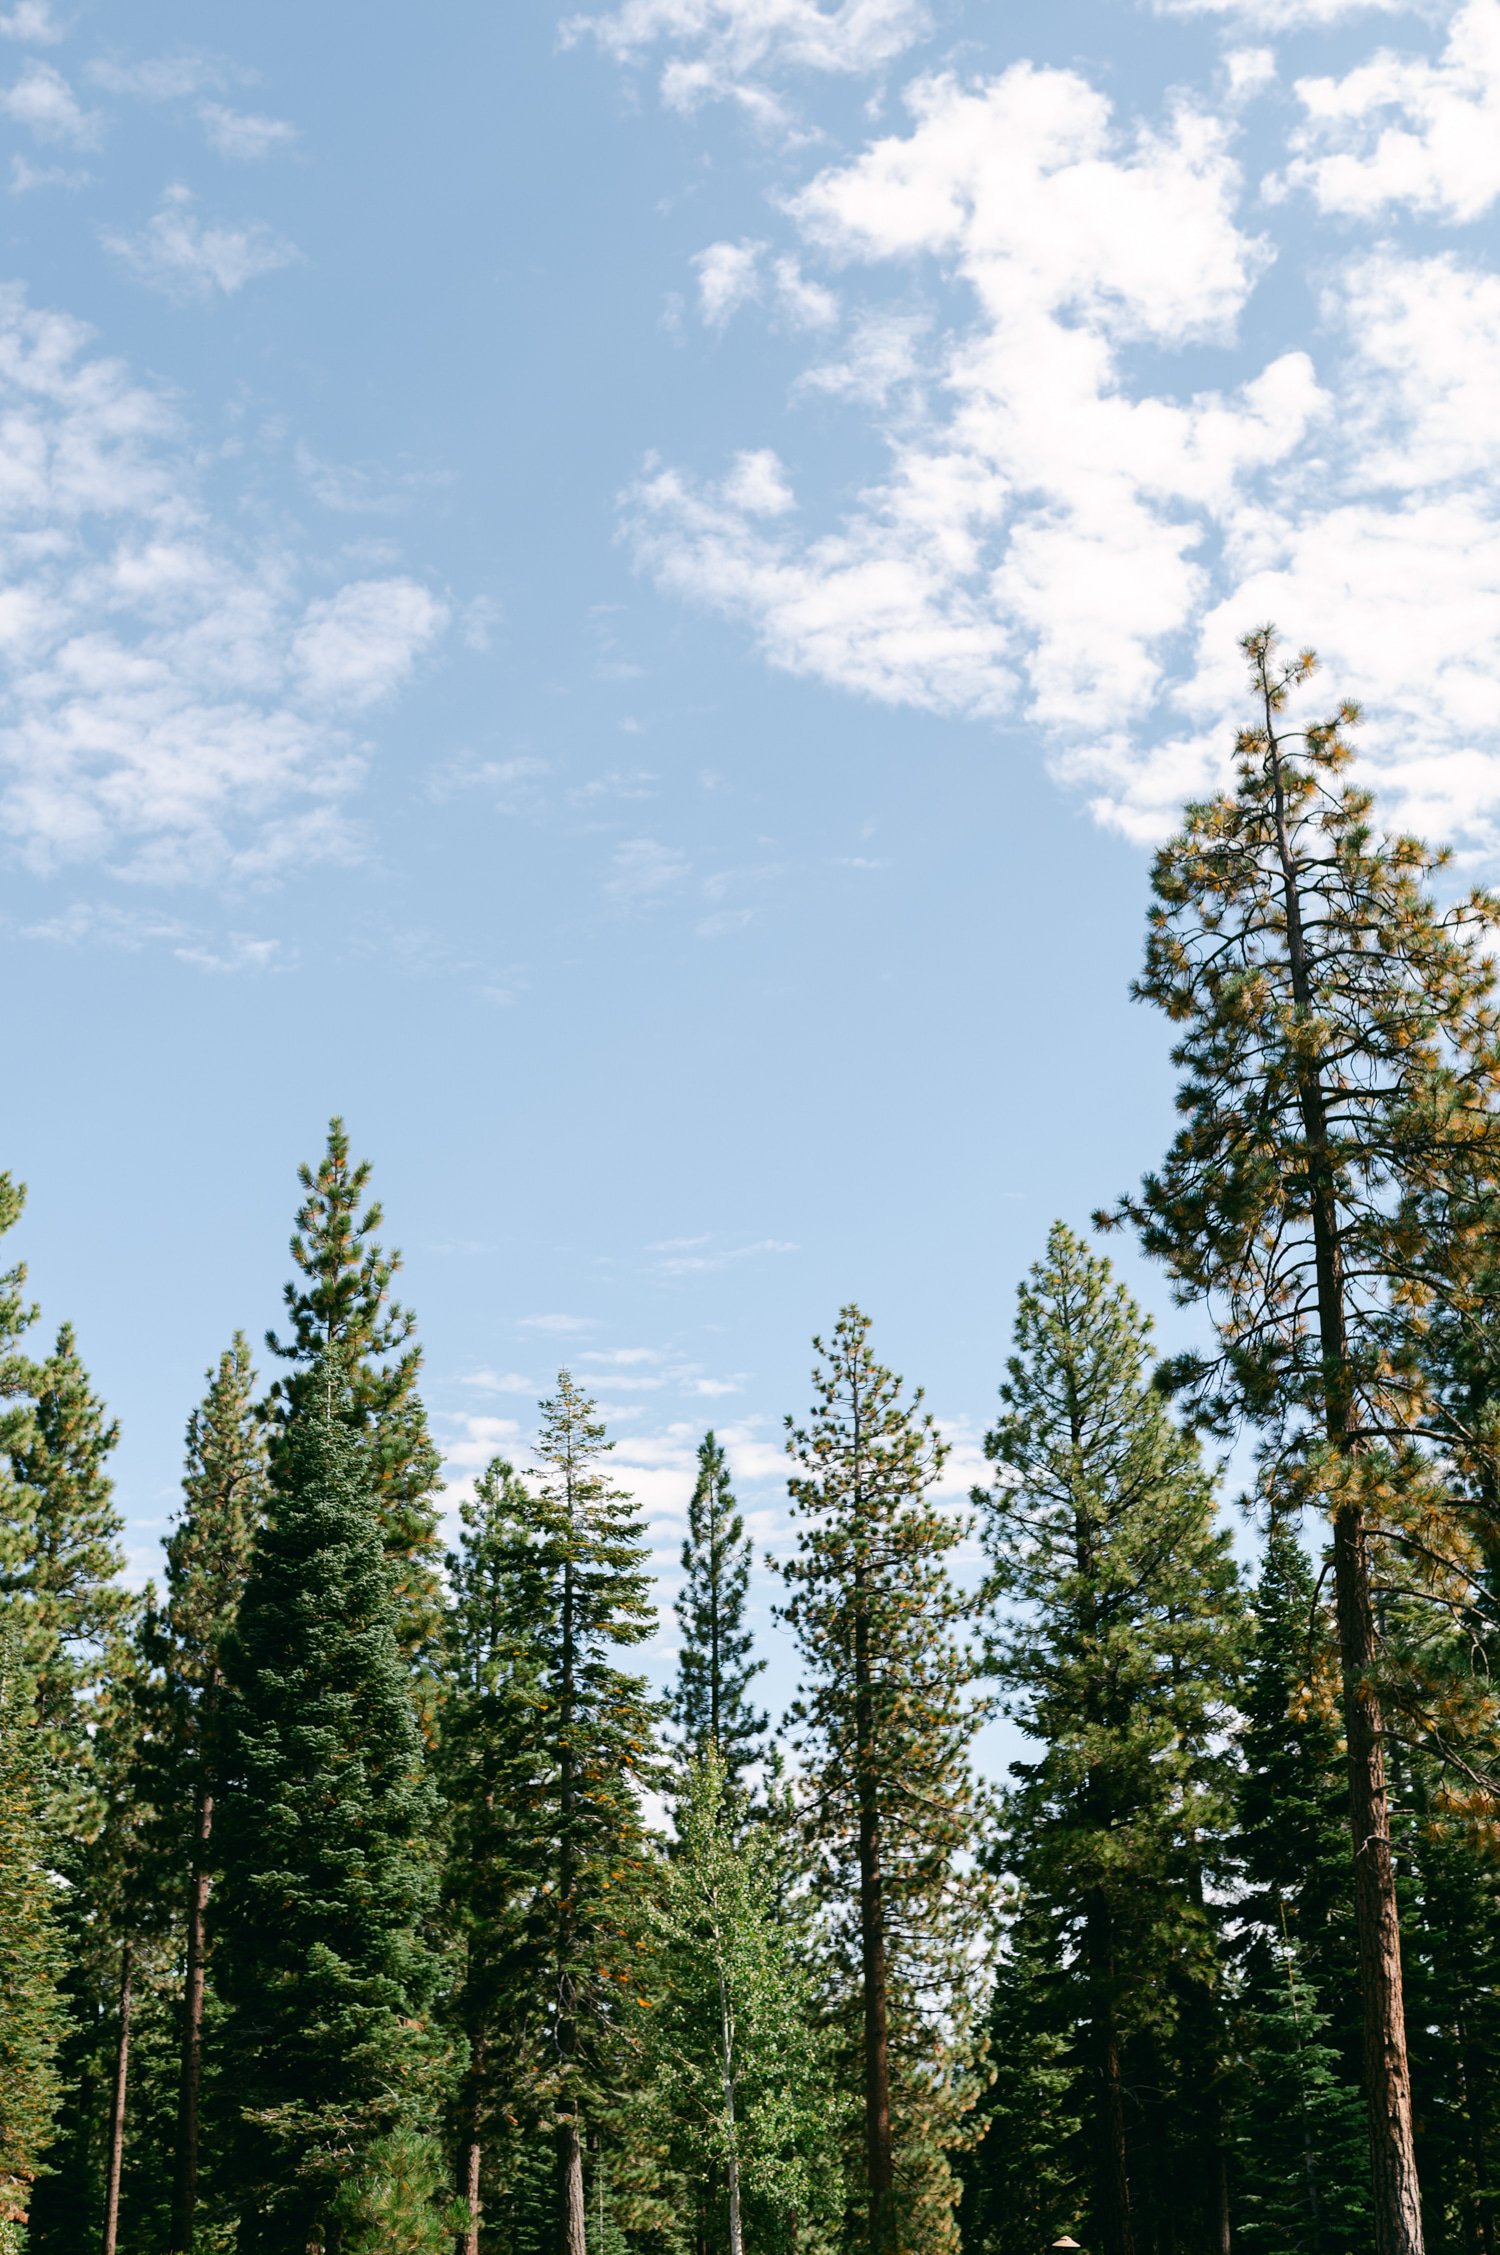 Martis Camp Wedding, photo of a group of tall trees against the blue sky